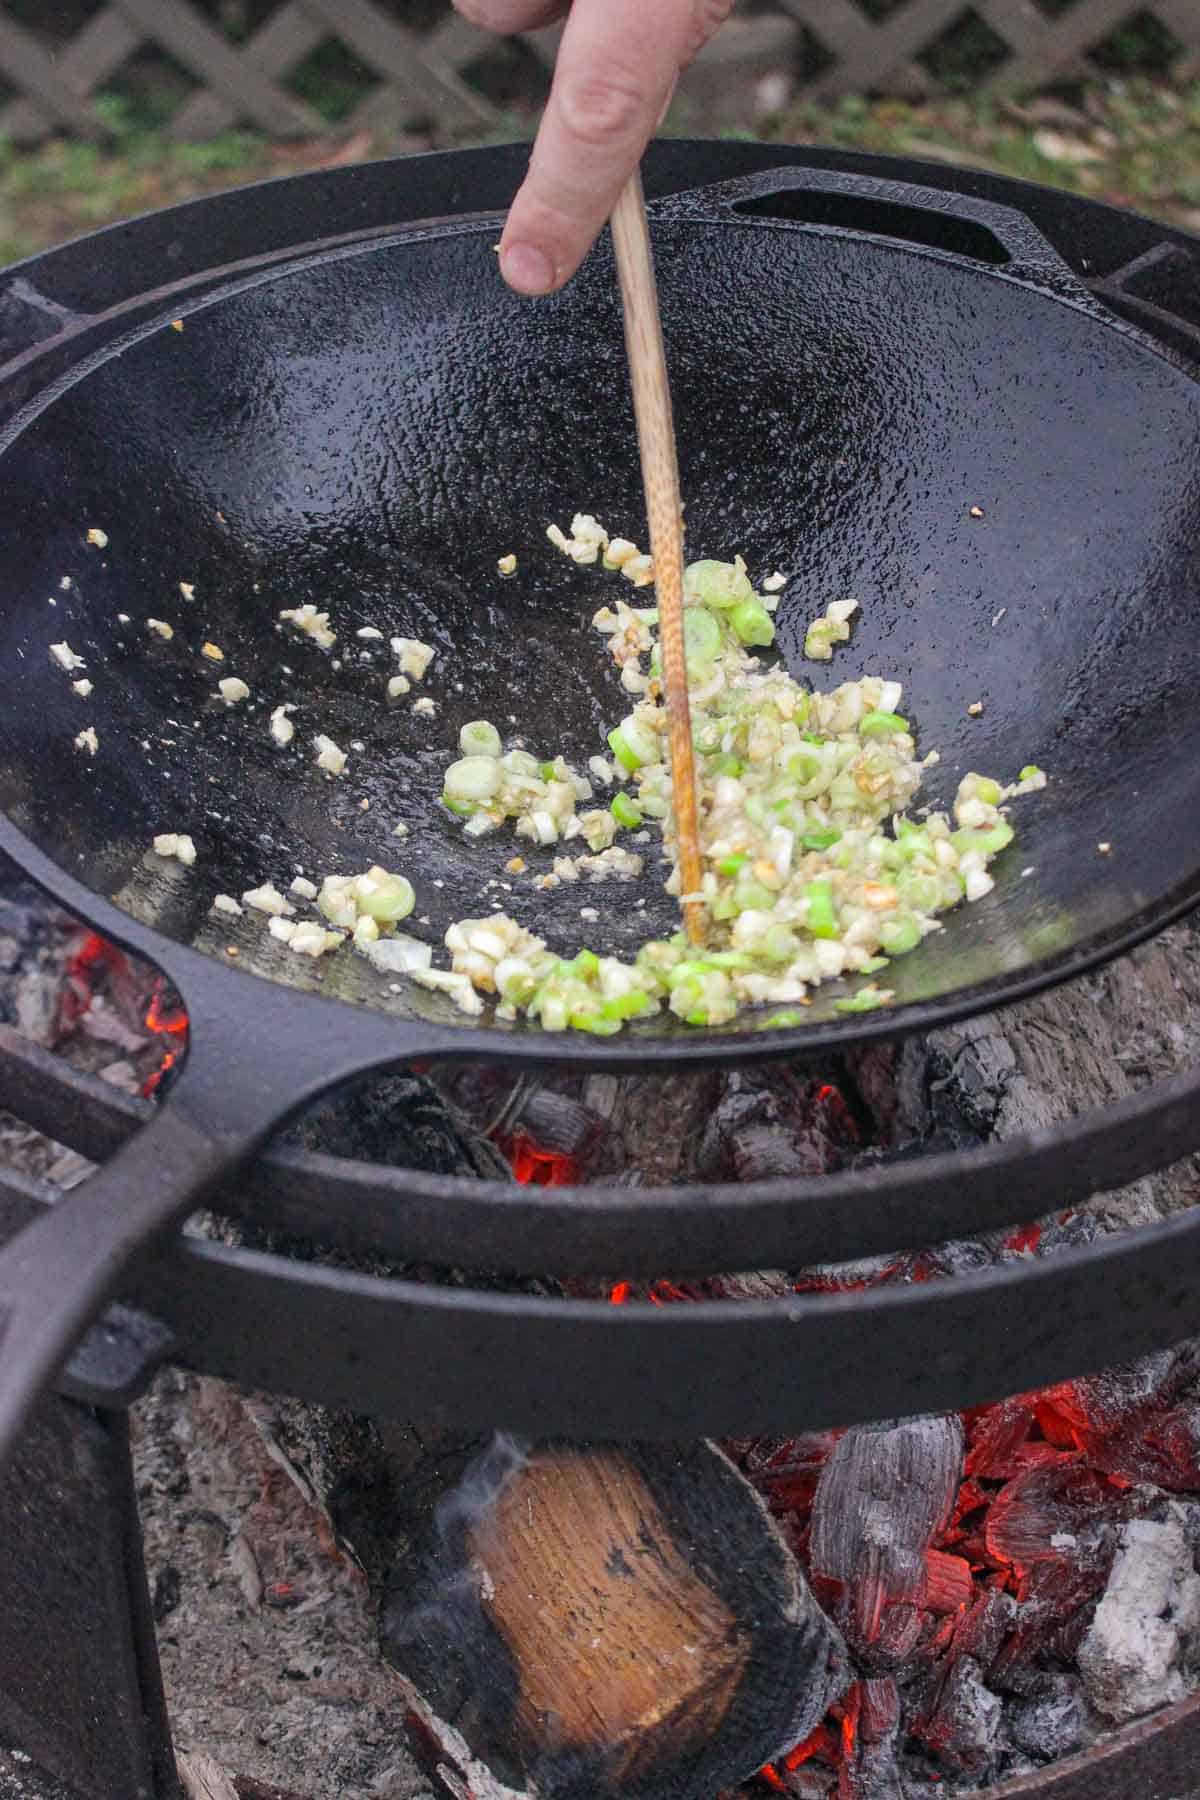 Cooking the garlic, scallions and ginger for the fried rice.